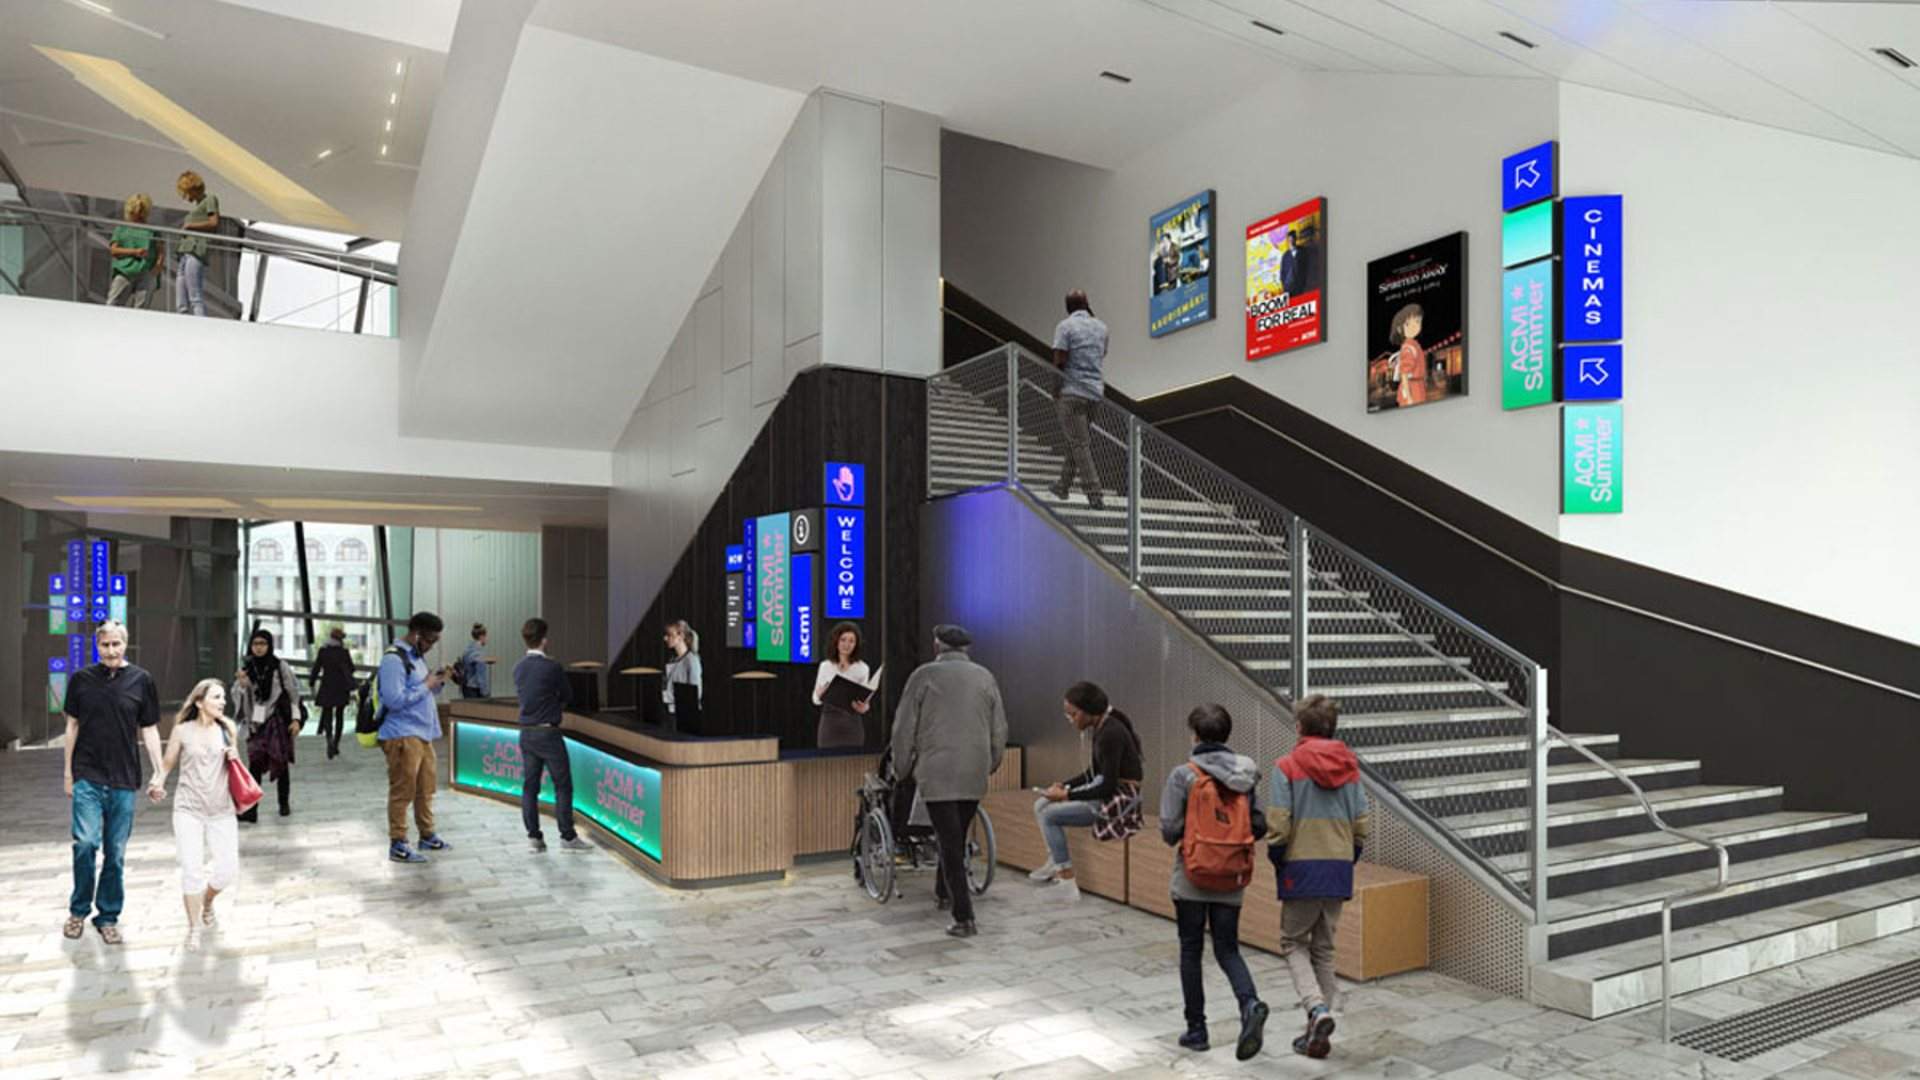 Here's What ACMI Will Look Like After Its Multimillion-Dollar Makeover